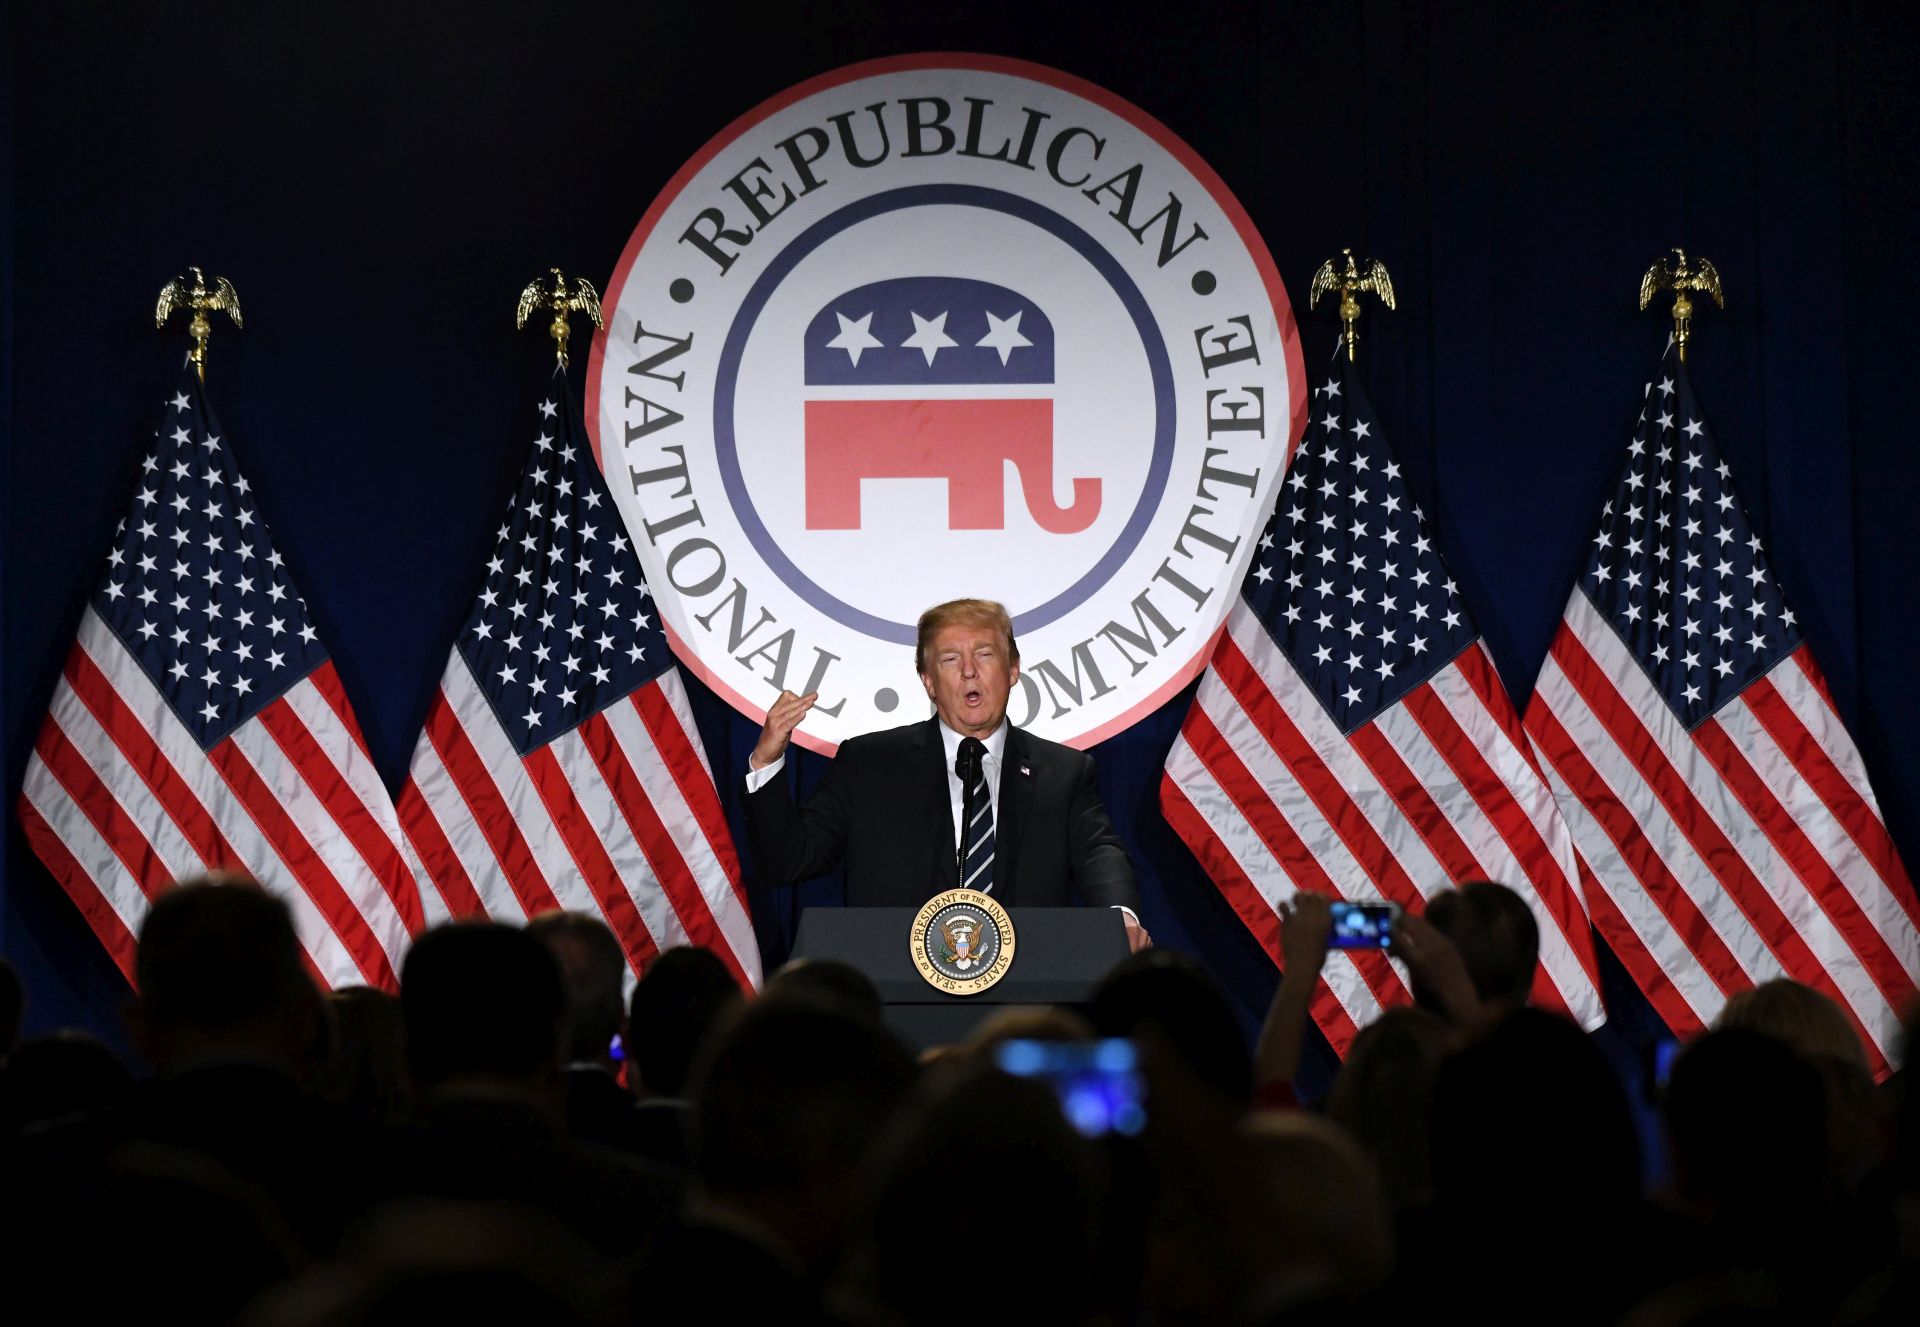 epa06490869 US President Donald J. Trump delivers remarks at the Republican National Committee winter meeting at the Trump International Hotel, in Washington, DC, USA, 01 February 2018.  EPA/OLIVIER DOULIERY / POOL